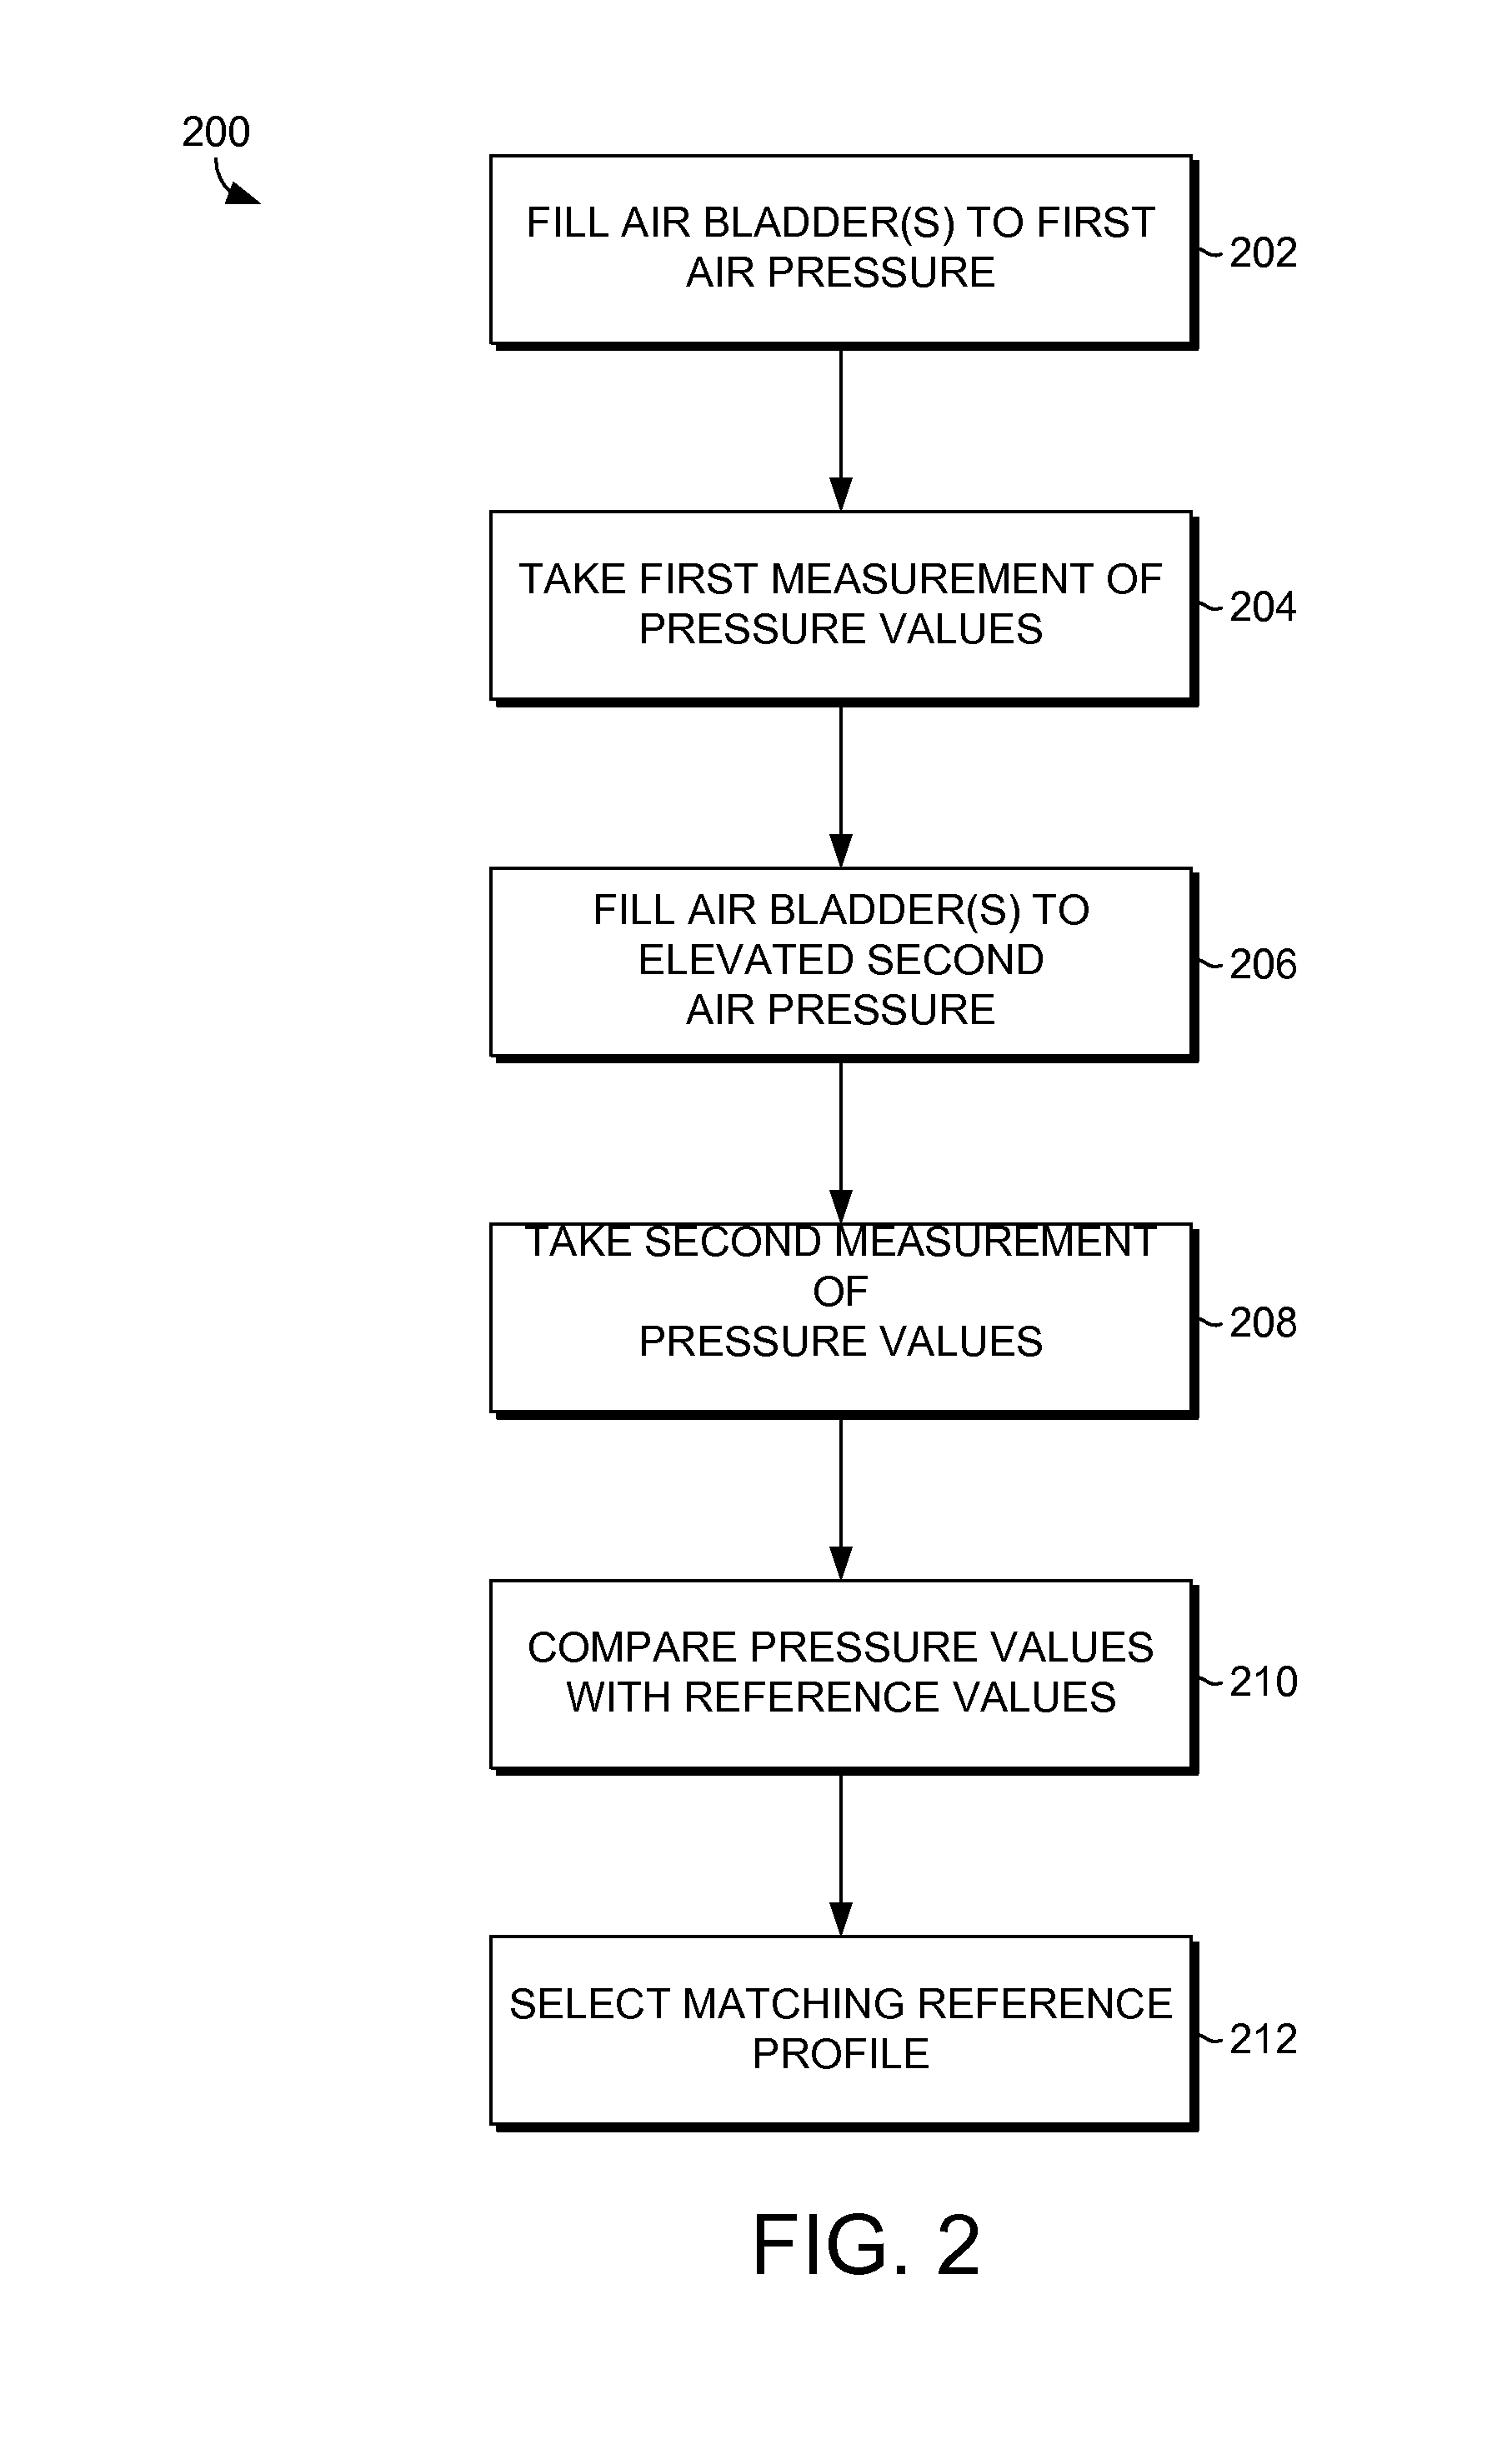 System and Method for Recommending a Bedding Product